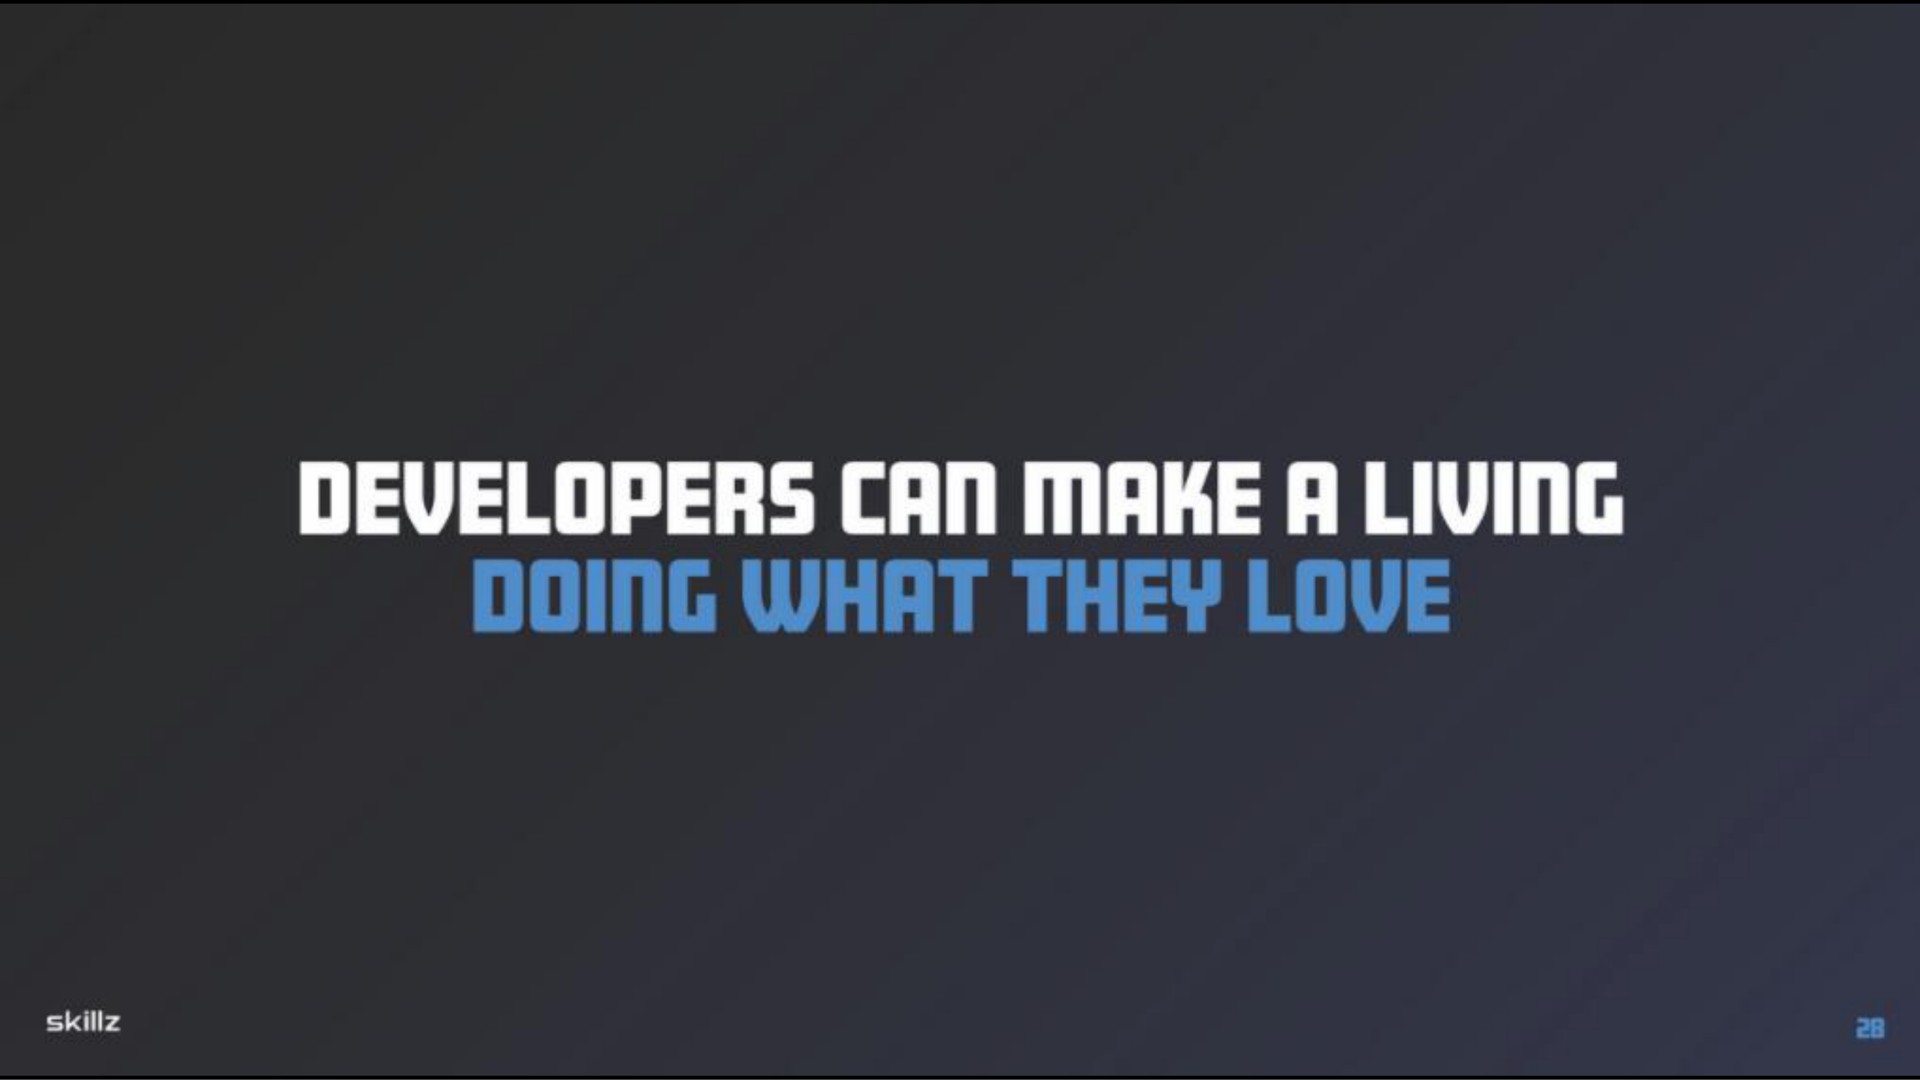 developers can make a living | Skillz